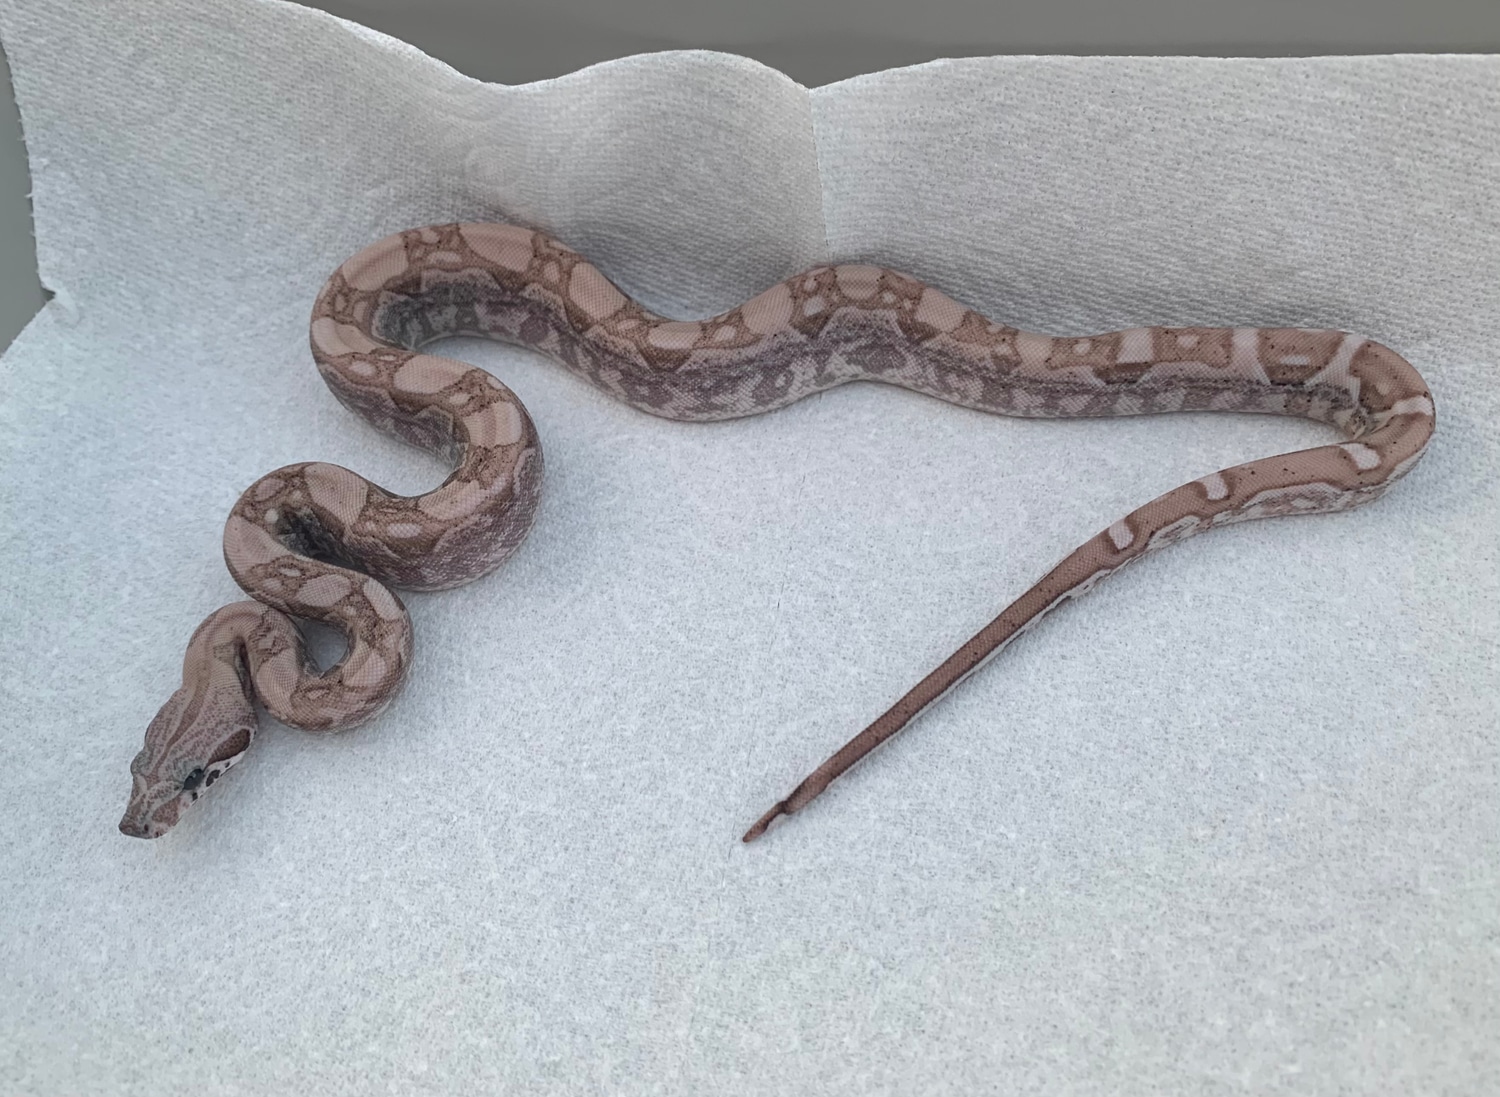 Aztec Carbon Ghost Het VPI T+ PH Type 1 Anery Boa Constrictor by Boaffliction.com